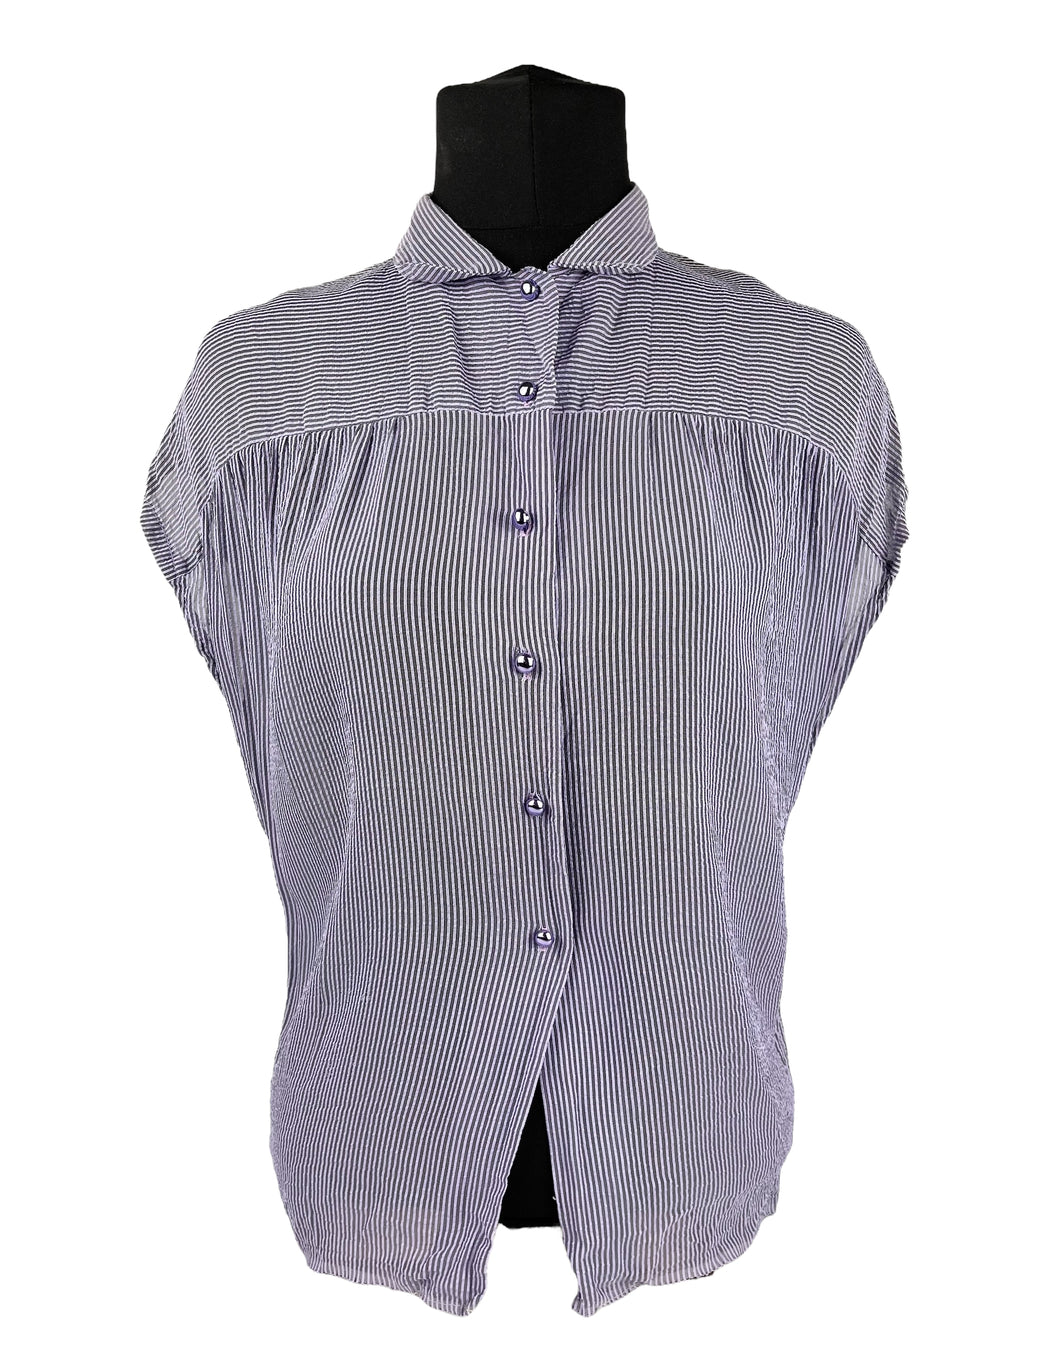 Original 1940's 1950's Purple and White Stripe Blouse with Purple Glass Buttons - Bust 36